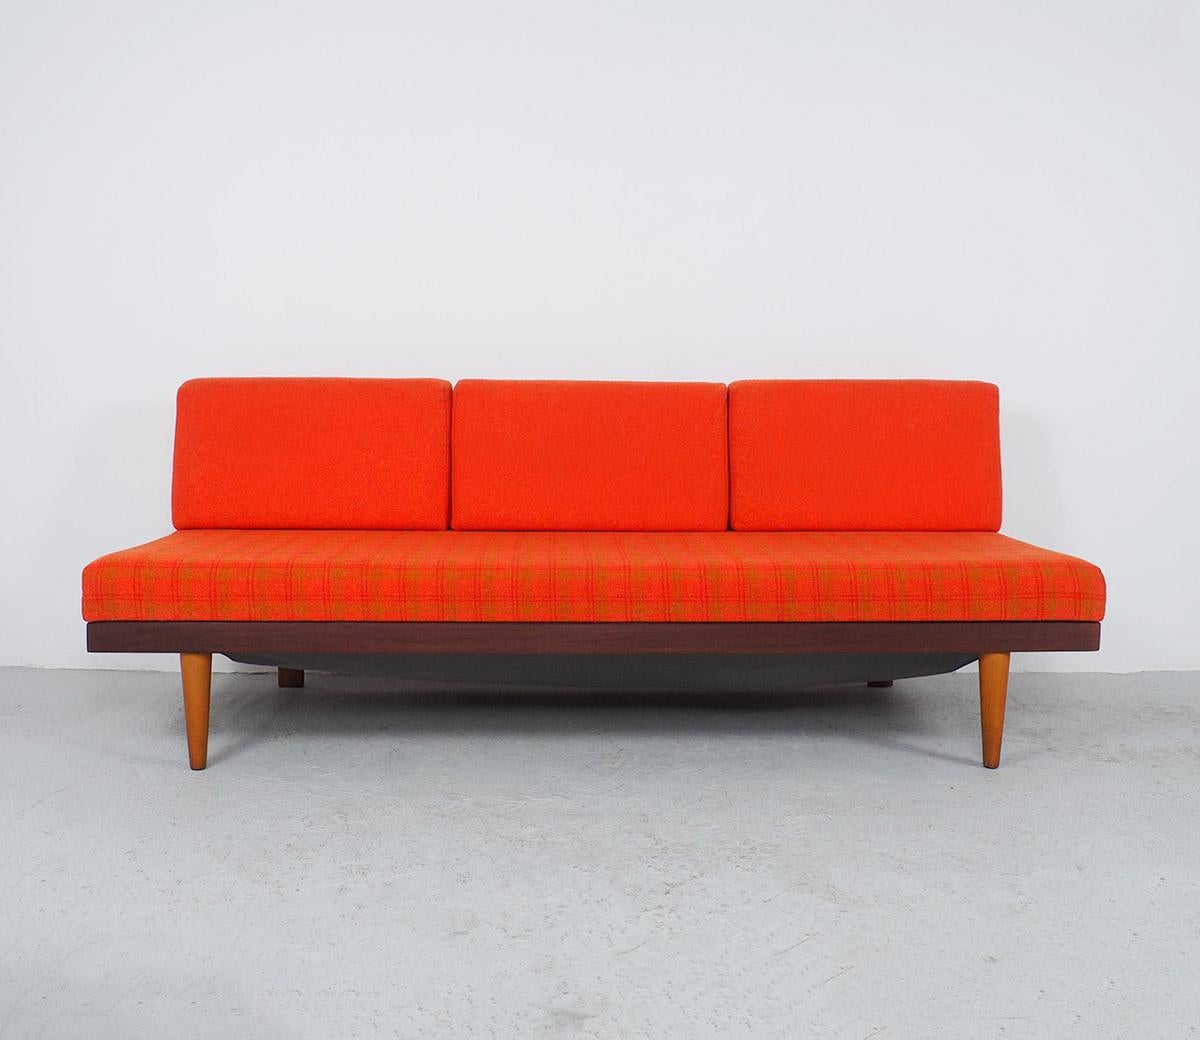 3-seater daybed or sofa bed designed by Ingmar Relling for Ekornes in the 1960s.

From the Svane series.

The teak wooden bench has a fixed mattress with 3 loose back cushions in a soft fresh orange color, the orange mattress has a motif of